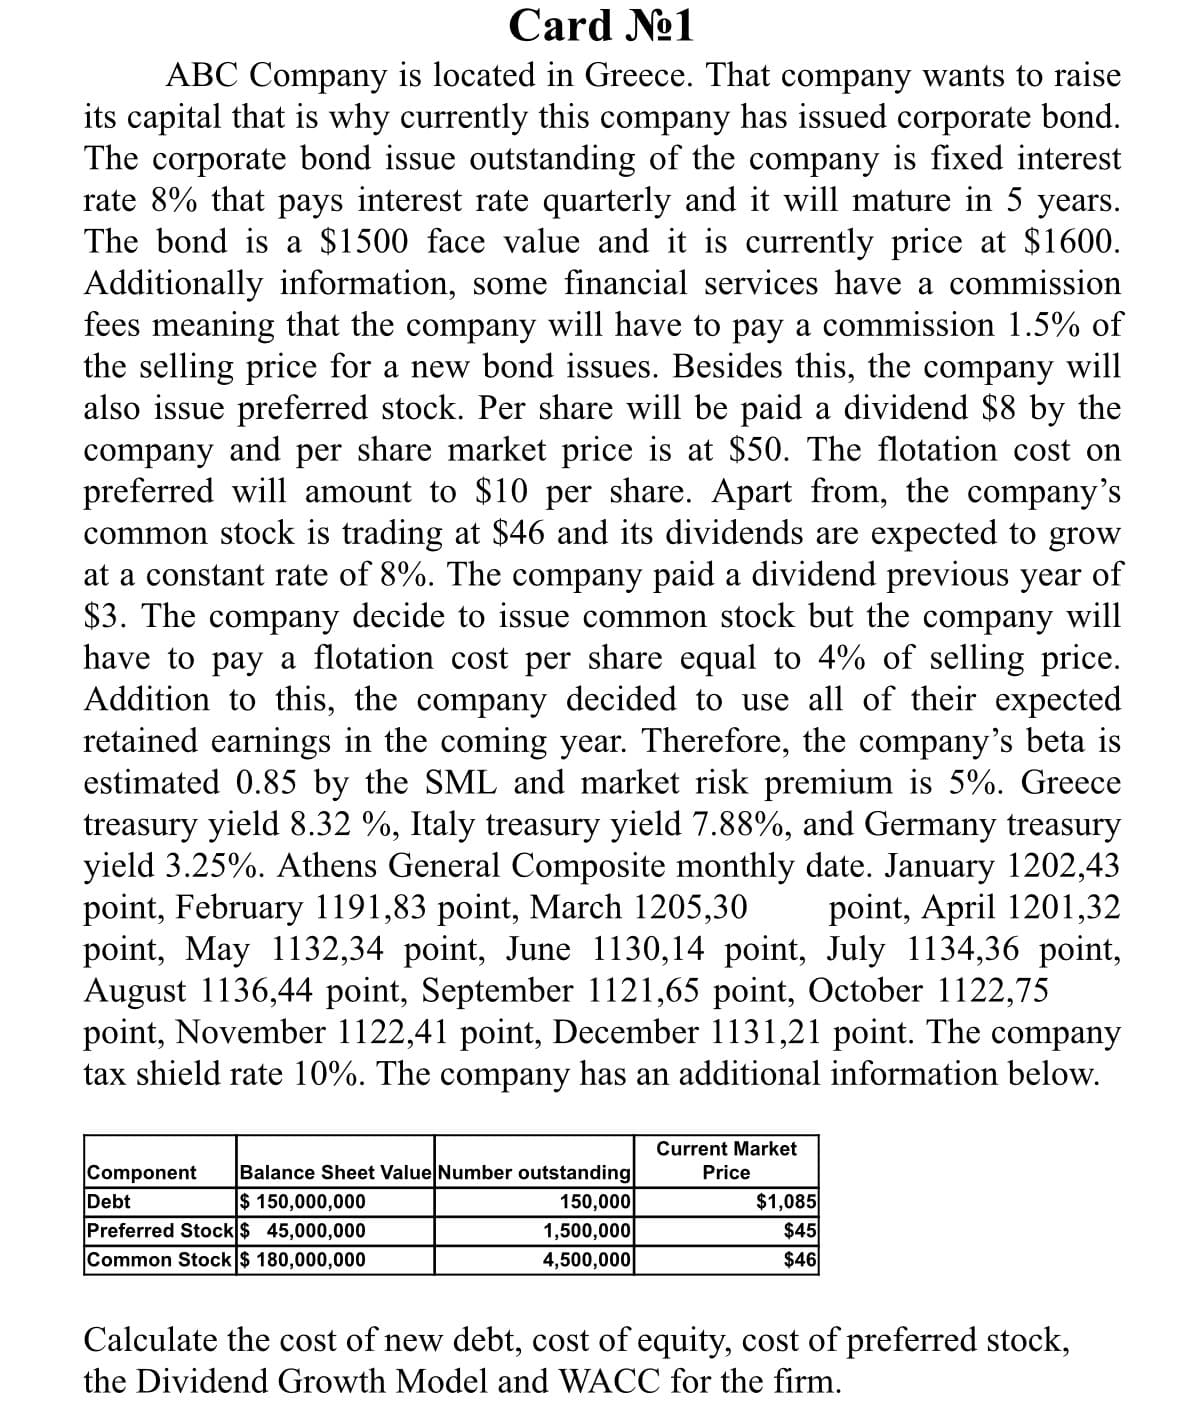 Card №1
ABC Company is located in Greece. That company wants to raise
its capital that is why currently this company has issued corporate bond.
The corporate bond issue outstanding of the company is fixed interest
rate 8% that pays interest rate quarterly and it will mature in 5 years.
The bond is a $1500 face value and it is currently price at $1600.
Additionally information, some financial services have a commission
fees meaning that the company will have to pay a commission 1.5% of
the selling price for a new bond issues. Besides this, the company will
also issue preferred stock. Per share will be paid a dividend $8 by the
company and per share market price is at $50. The flotation cost on
preferred will amount to $10 per share. Apart from, the company's
common stock is trading at $46 and its dividends are expected to grow
at a constant rate of 8%. The company paid a dividend previous year of
$3. The company decide to issue common stock but the company will
have to pay a flotation cost per share equal to 4% of selling price.
Addition to this, the company decided to use all of their expected
retained earnings in the coming year. Therefore, the company's beta is
estimated 0.85 by the SML and market risk premium is 5%. Greece
treasury yield 8.32 %, Italy treasury yield 7.88%, and Germany treasury
yield 3.25%. Athens General Composite monthly date. January 1202,43
point, February 1191,83 point, March 1205,30 point, April 1201,32
point, May 1132,34 point, June 1130,14 point, July 1134,36 point,
August 1136,44 point, September 1121,65 point, October 1122,75
point, November 1122,41 point, December 1131,21 point. The company
tax shield rate 10%. The company has an additional information below.
Current Market
Component
Debt
Preferred Stock $ 45,000,000
Balance Sheet Value Number outstanding
Price
$ 150,000,000
150,000
$1,085
1,500,000
$45
Common Stock $ 180,000,000
4,500,000
$46
Calculate the cost of new debt, cost of equity, cost of preferred stock,
the Dividend Growth Model and WACC for the firm.